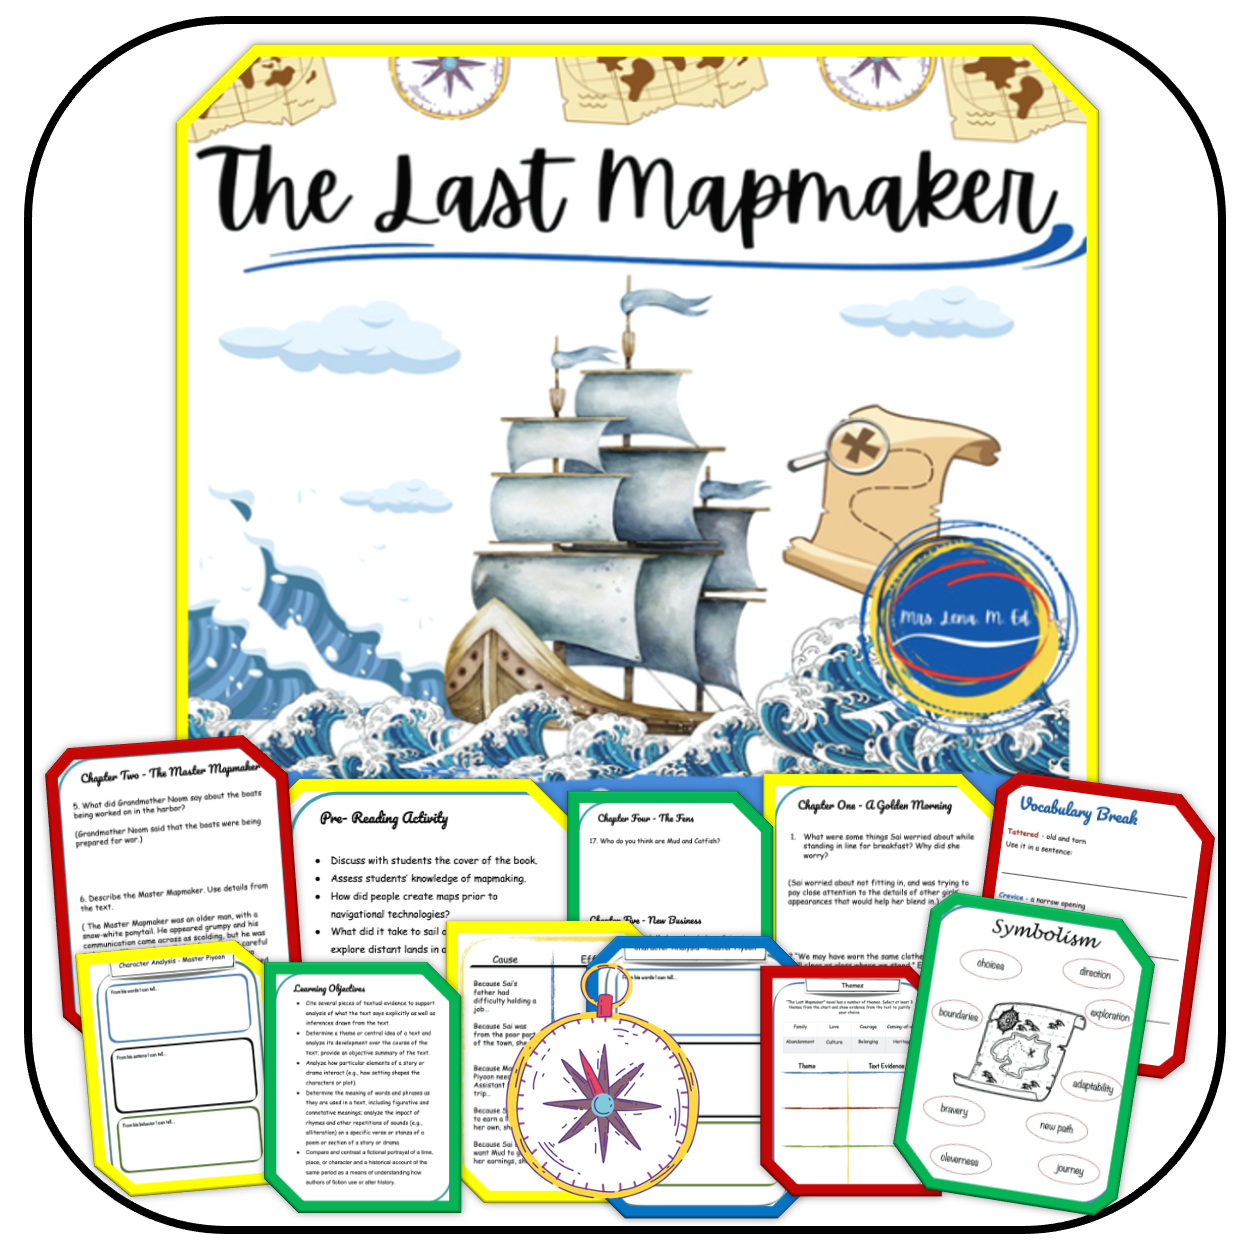 The Last Mapmaker by Soontornvat Novel Guide upper elementary and middle school action and adventure story about navigation, character development, coming of age, growth mindset and setting your own path.

